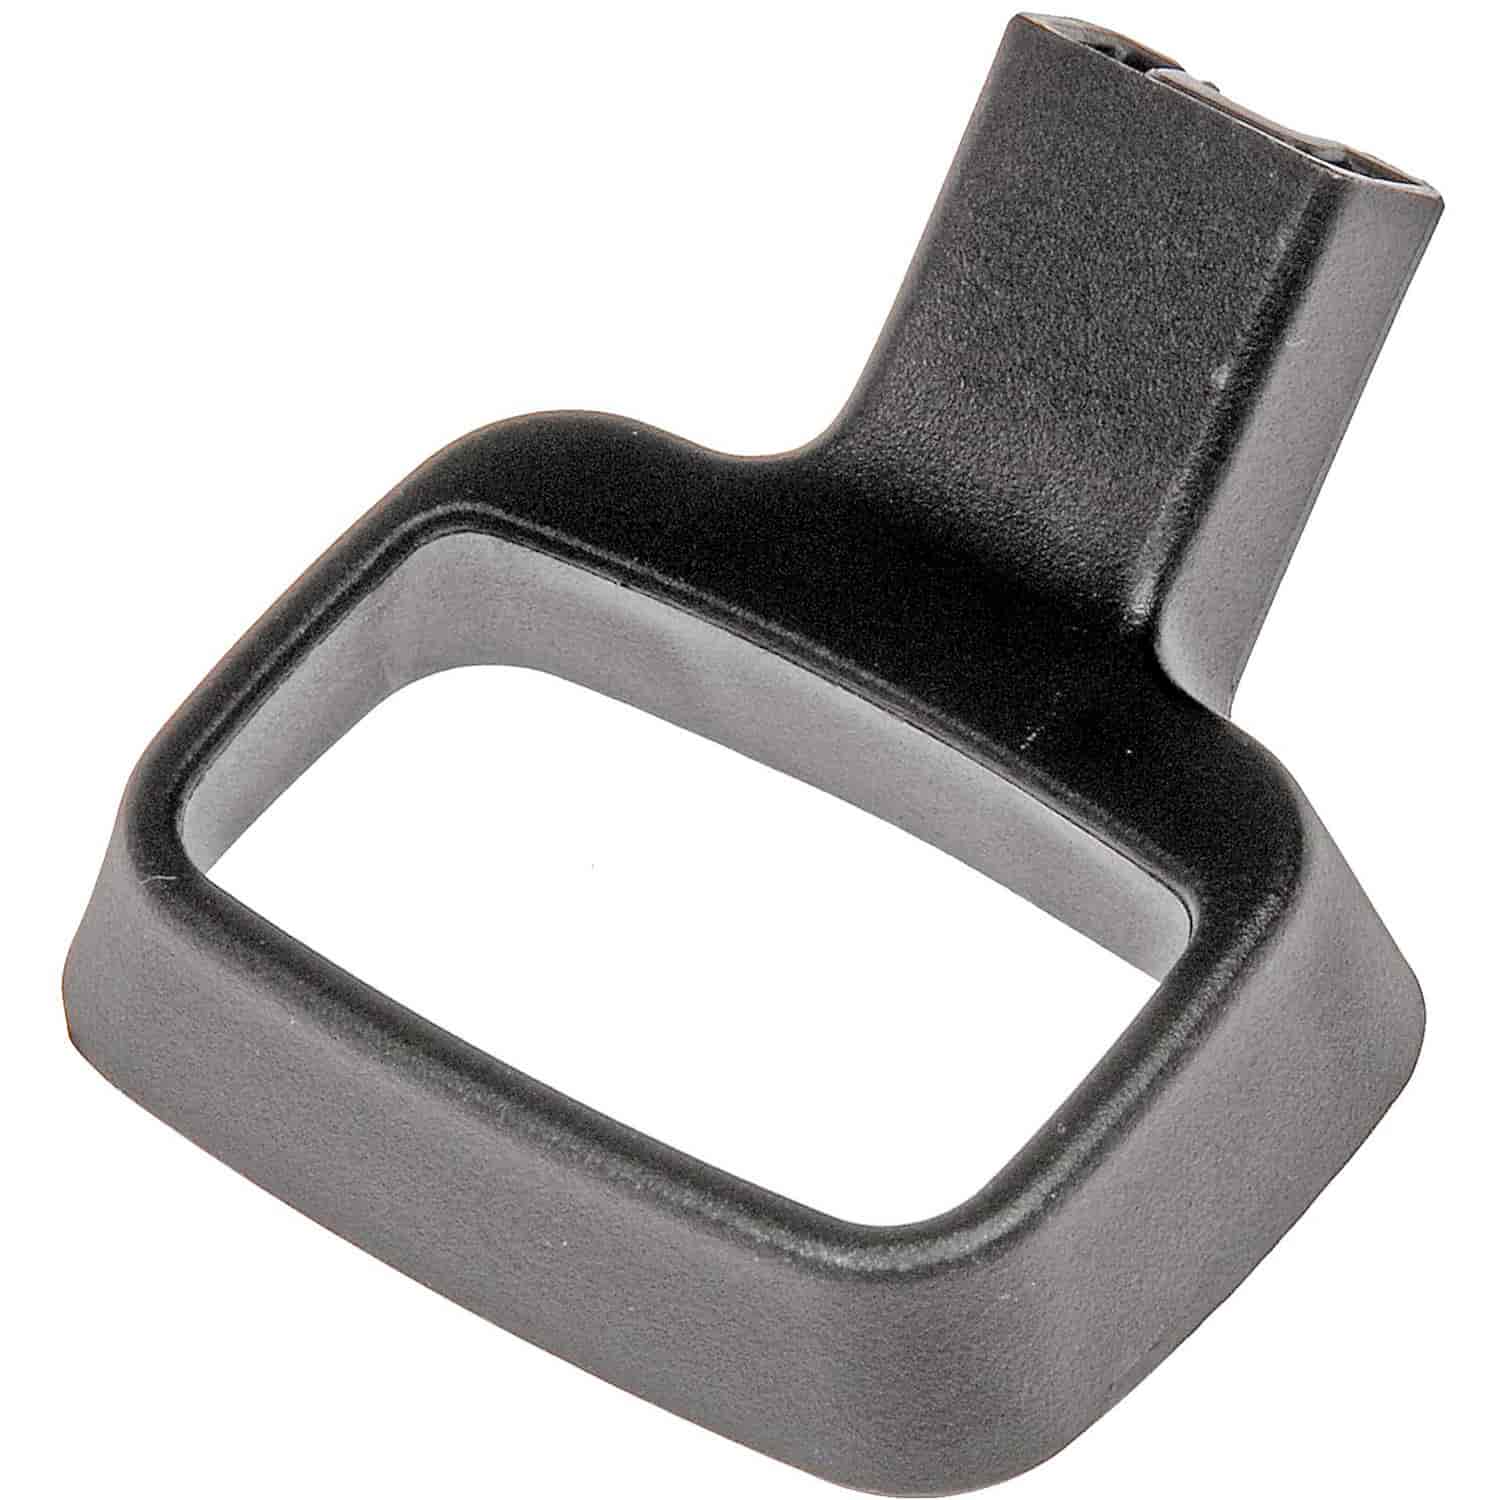 Seat Adjustment Handle Replacement